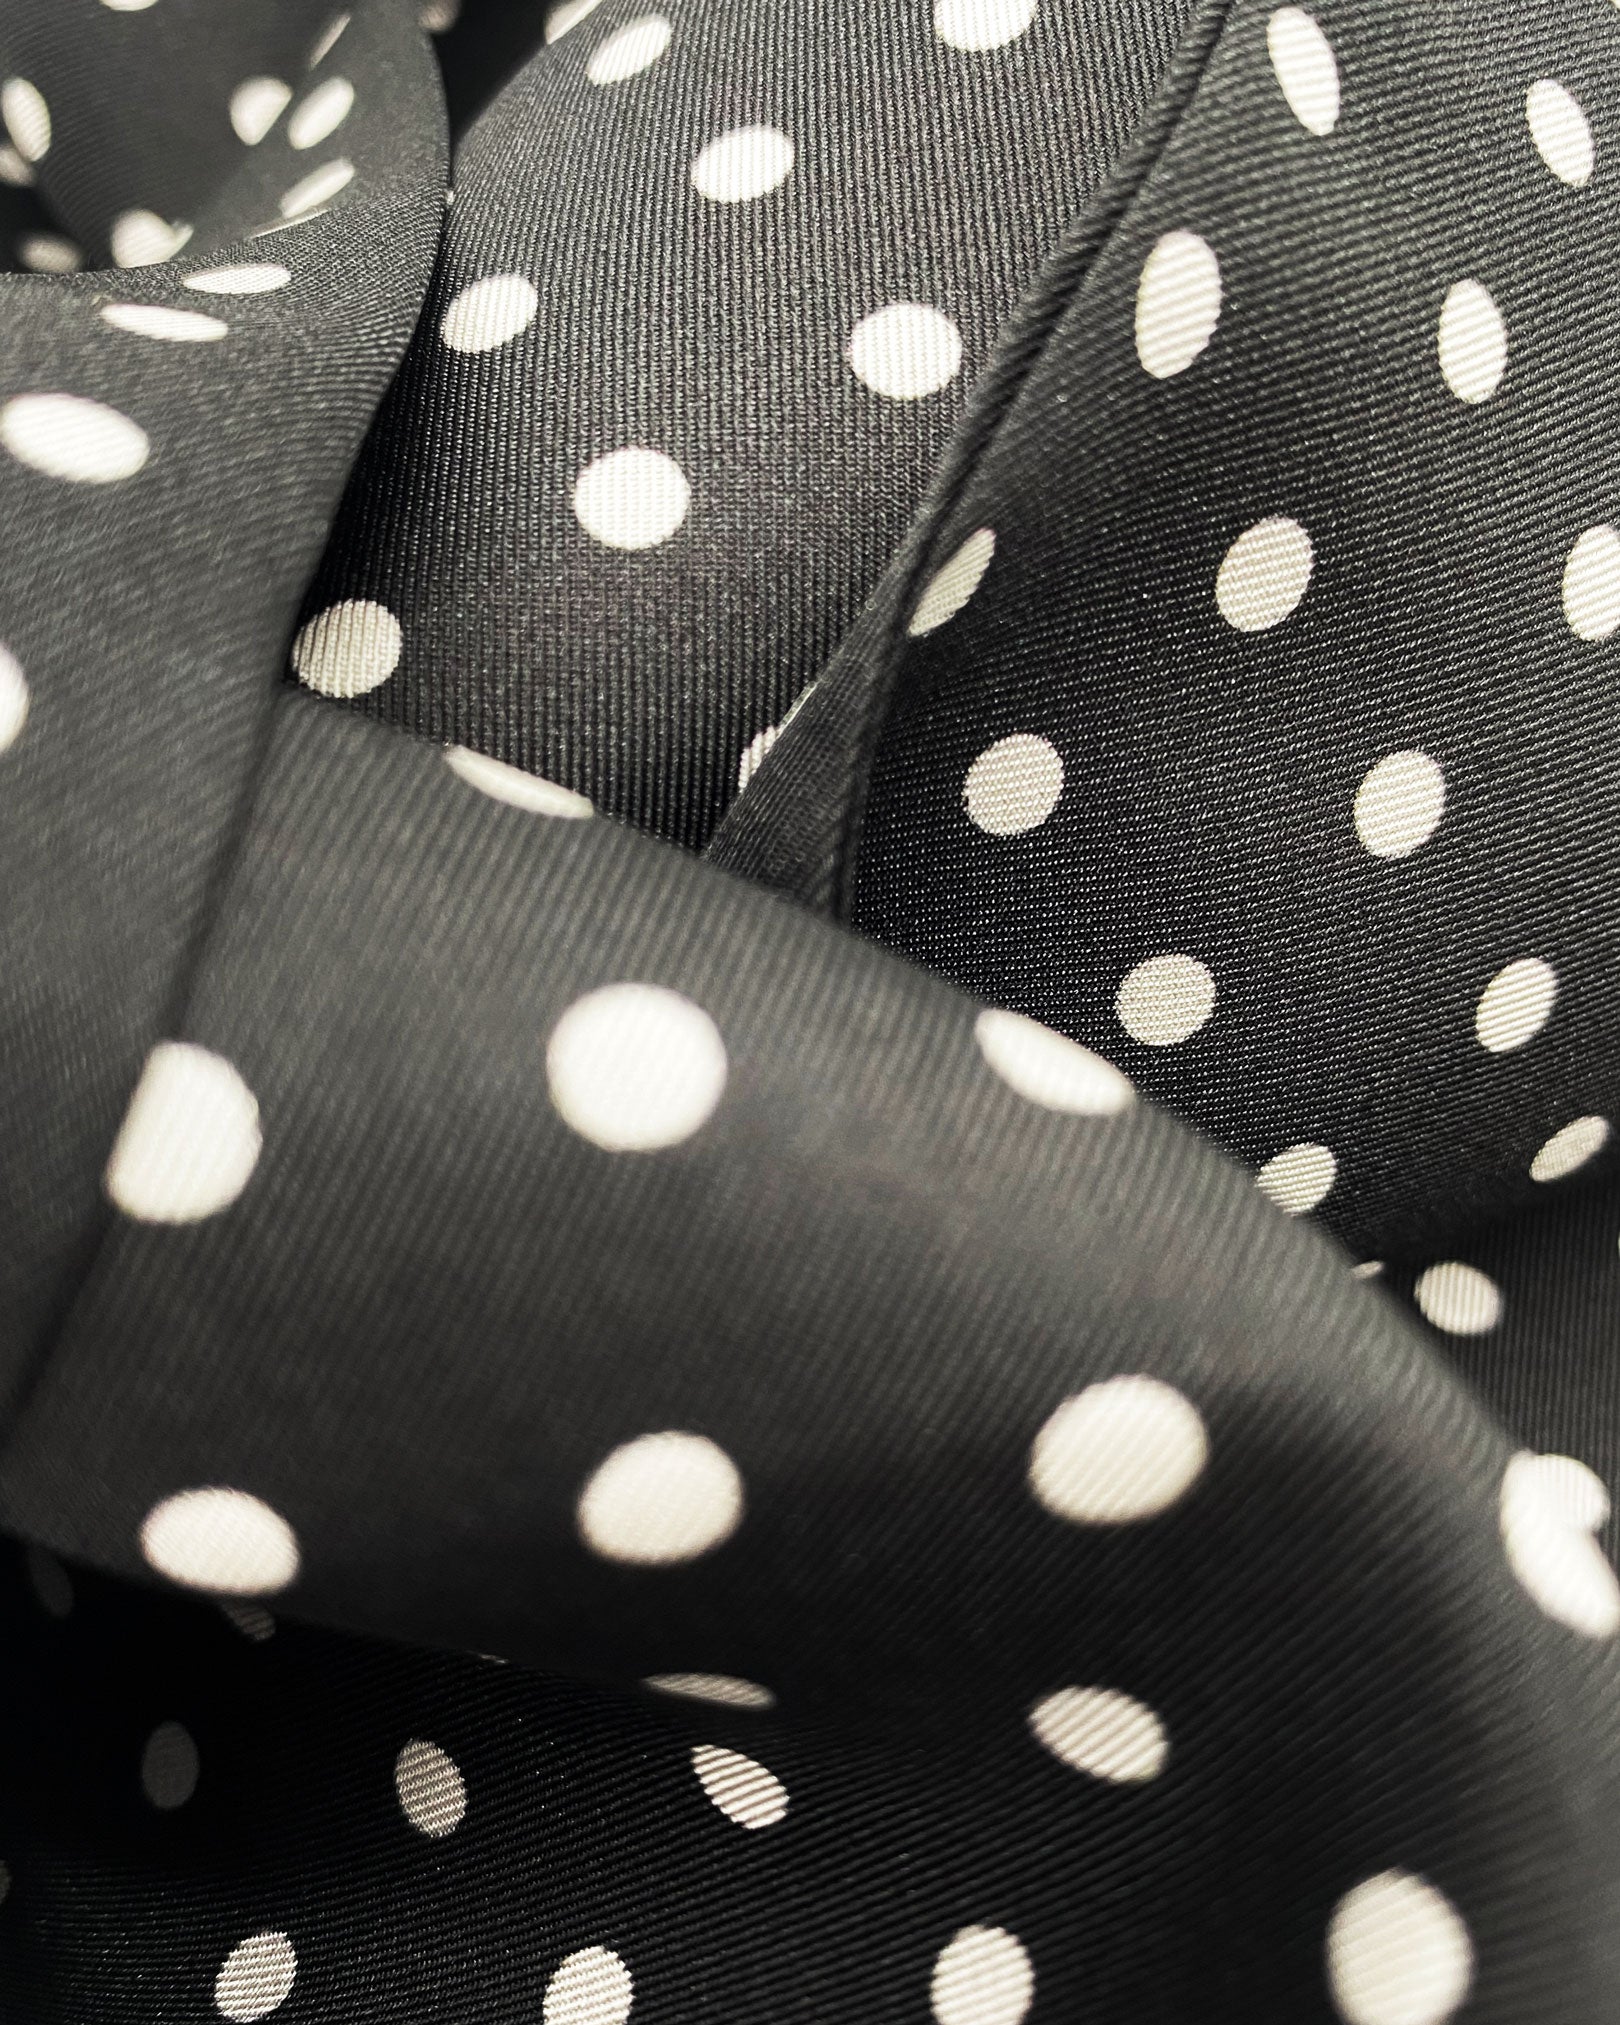 Ruffled close-up view of the 'Shinagwa' silk scarf, presenting a closer view of the white polka dot pattern and subtle lustre of the material.